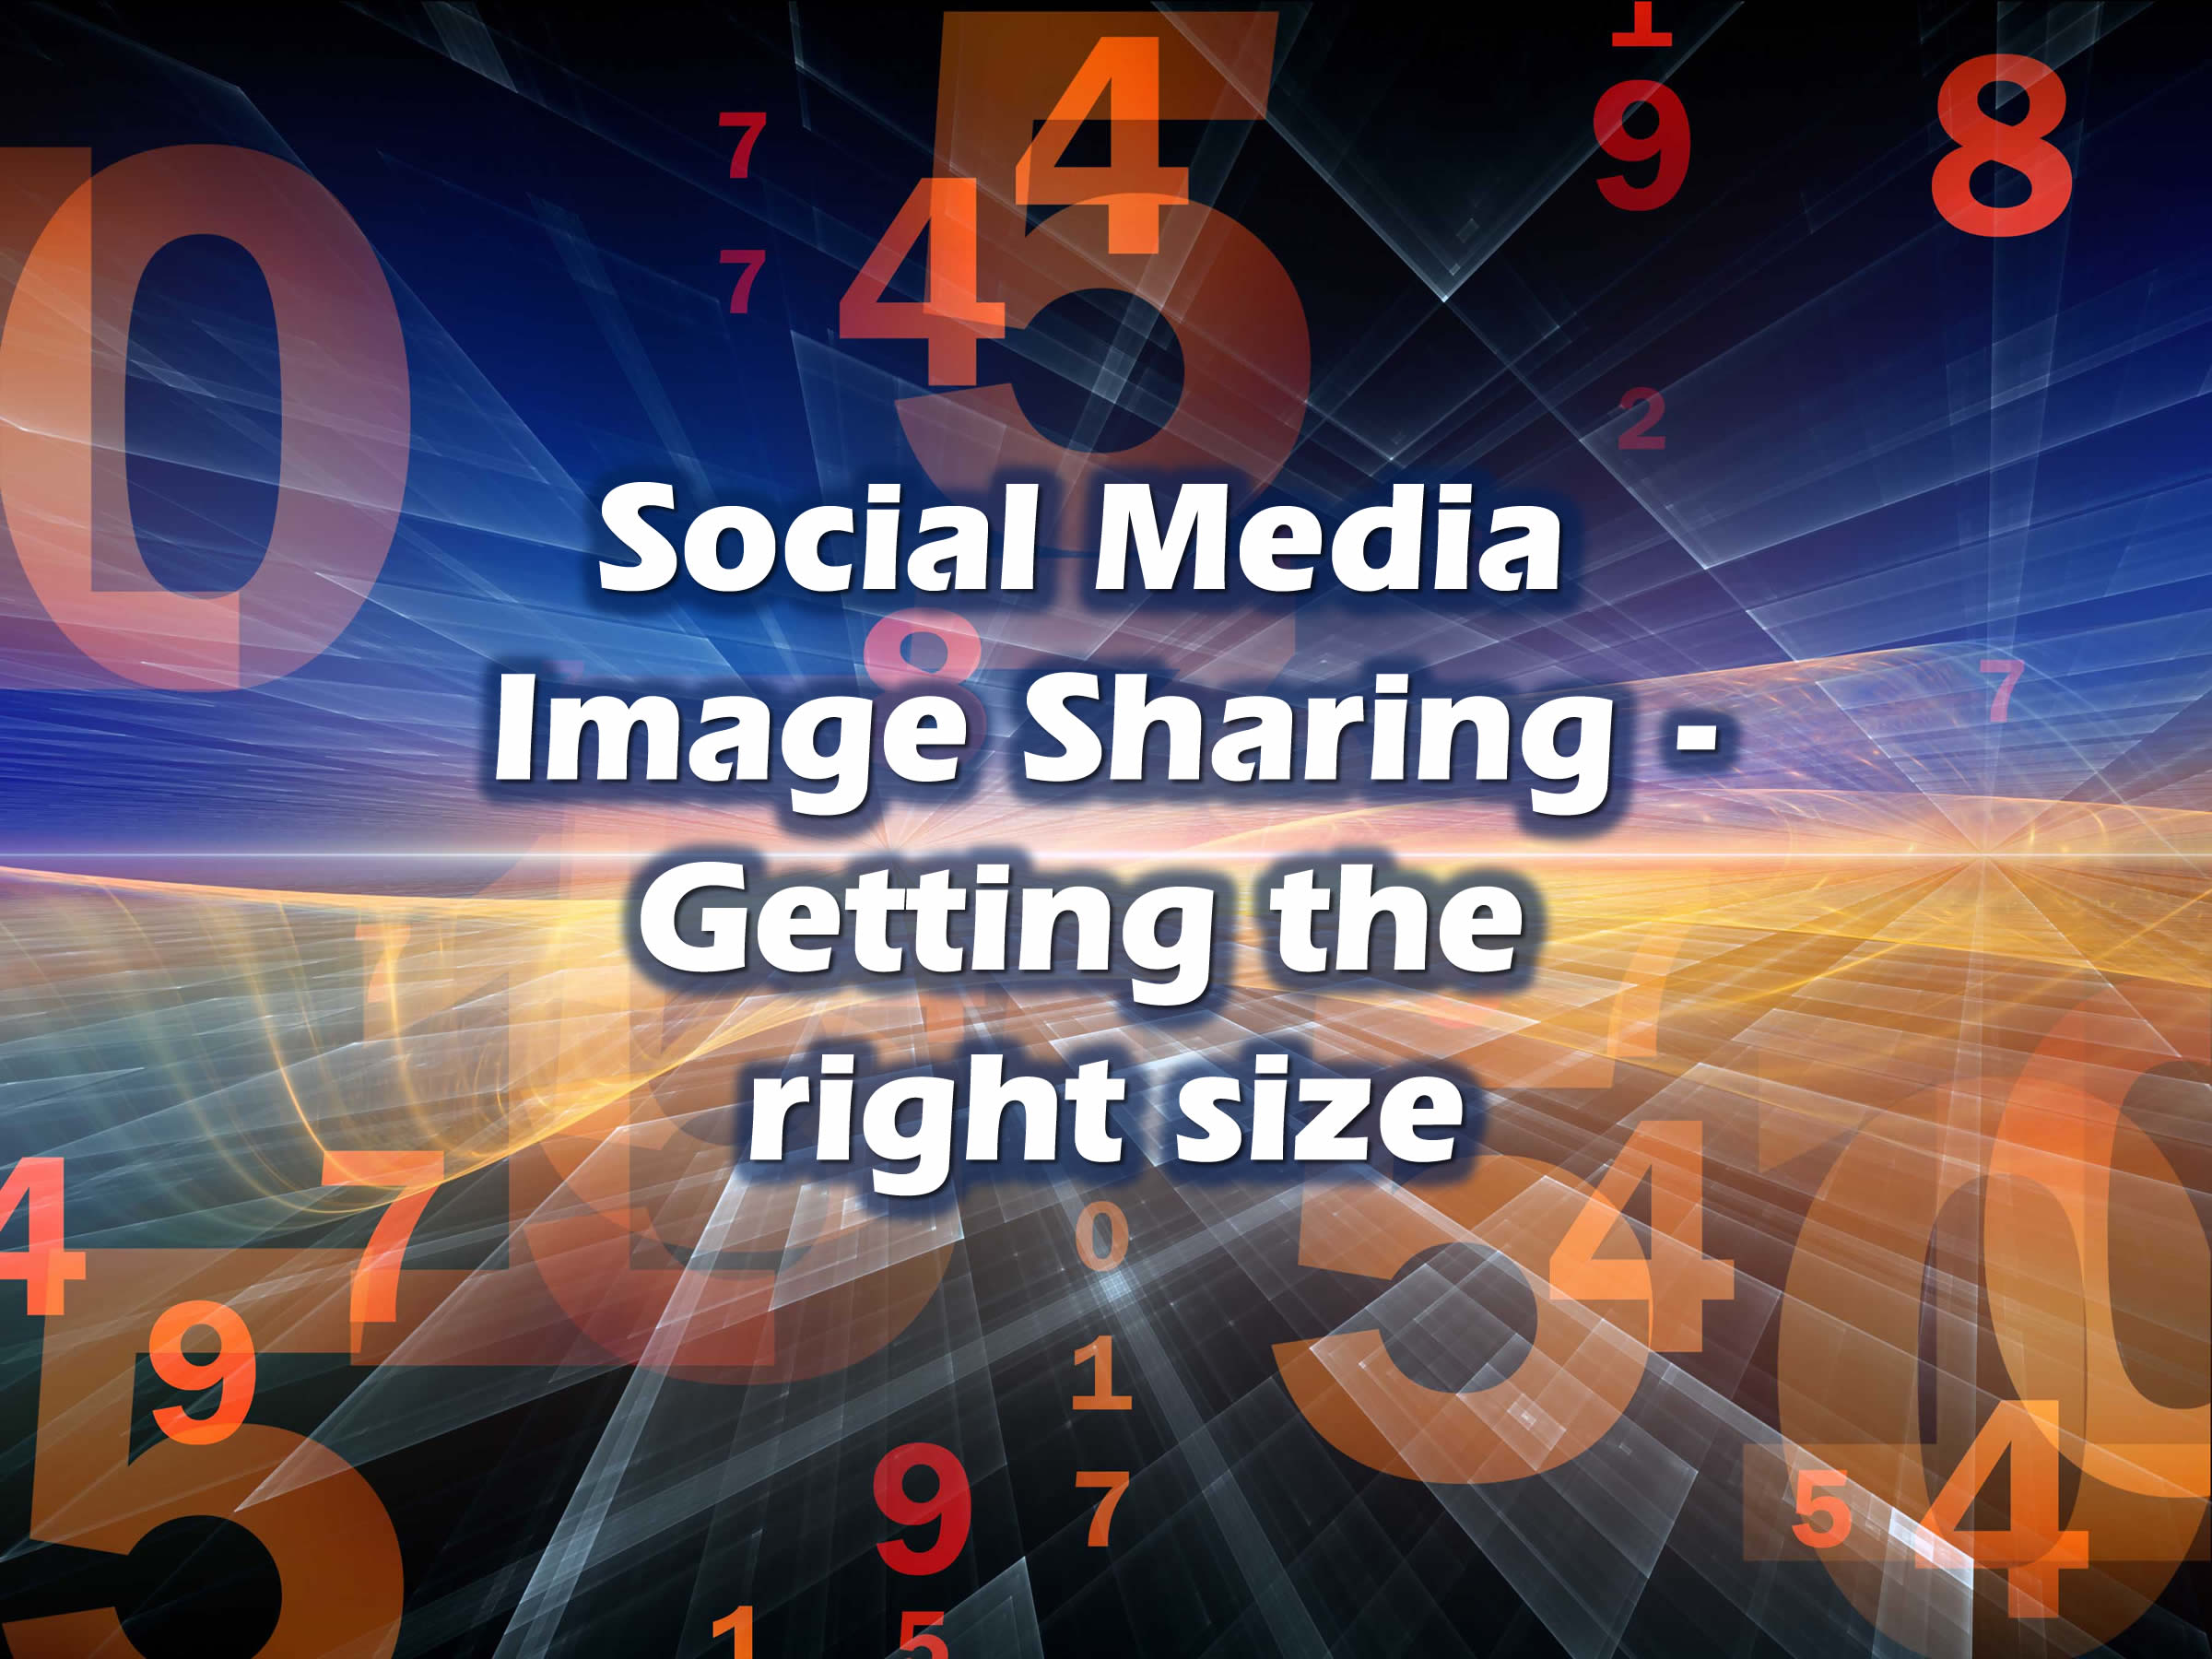 How to make the perfect social media sharing image - part 2 Getting the Size Right